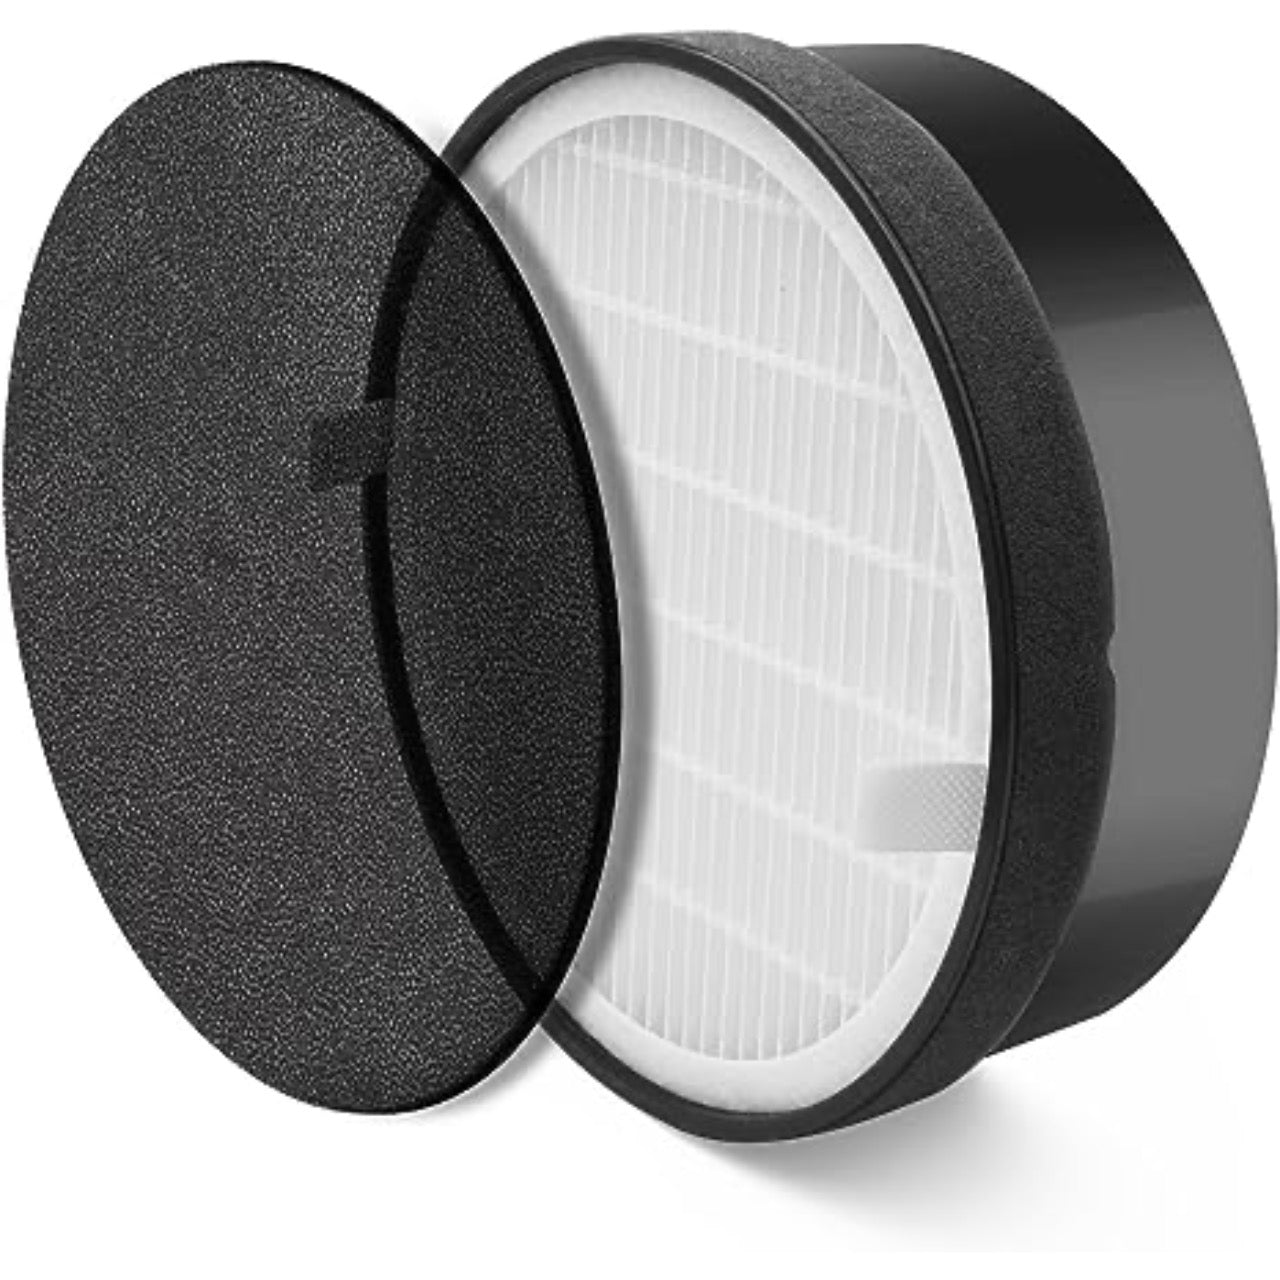 Nispira LV-H132 True HEPA Air Filter with Carbon Pre Filter Replacement Compatible with Air Purifiers LV-H132. Compared to Part LV-H132-RF - 7.5” x 2.4” x 7.5”